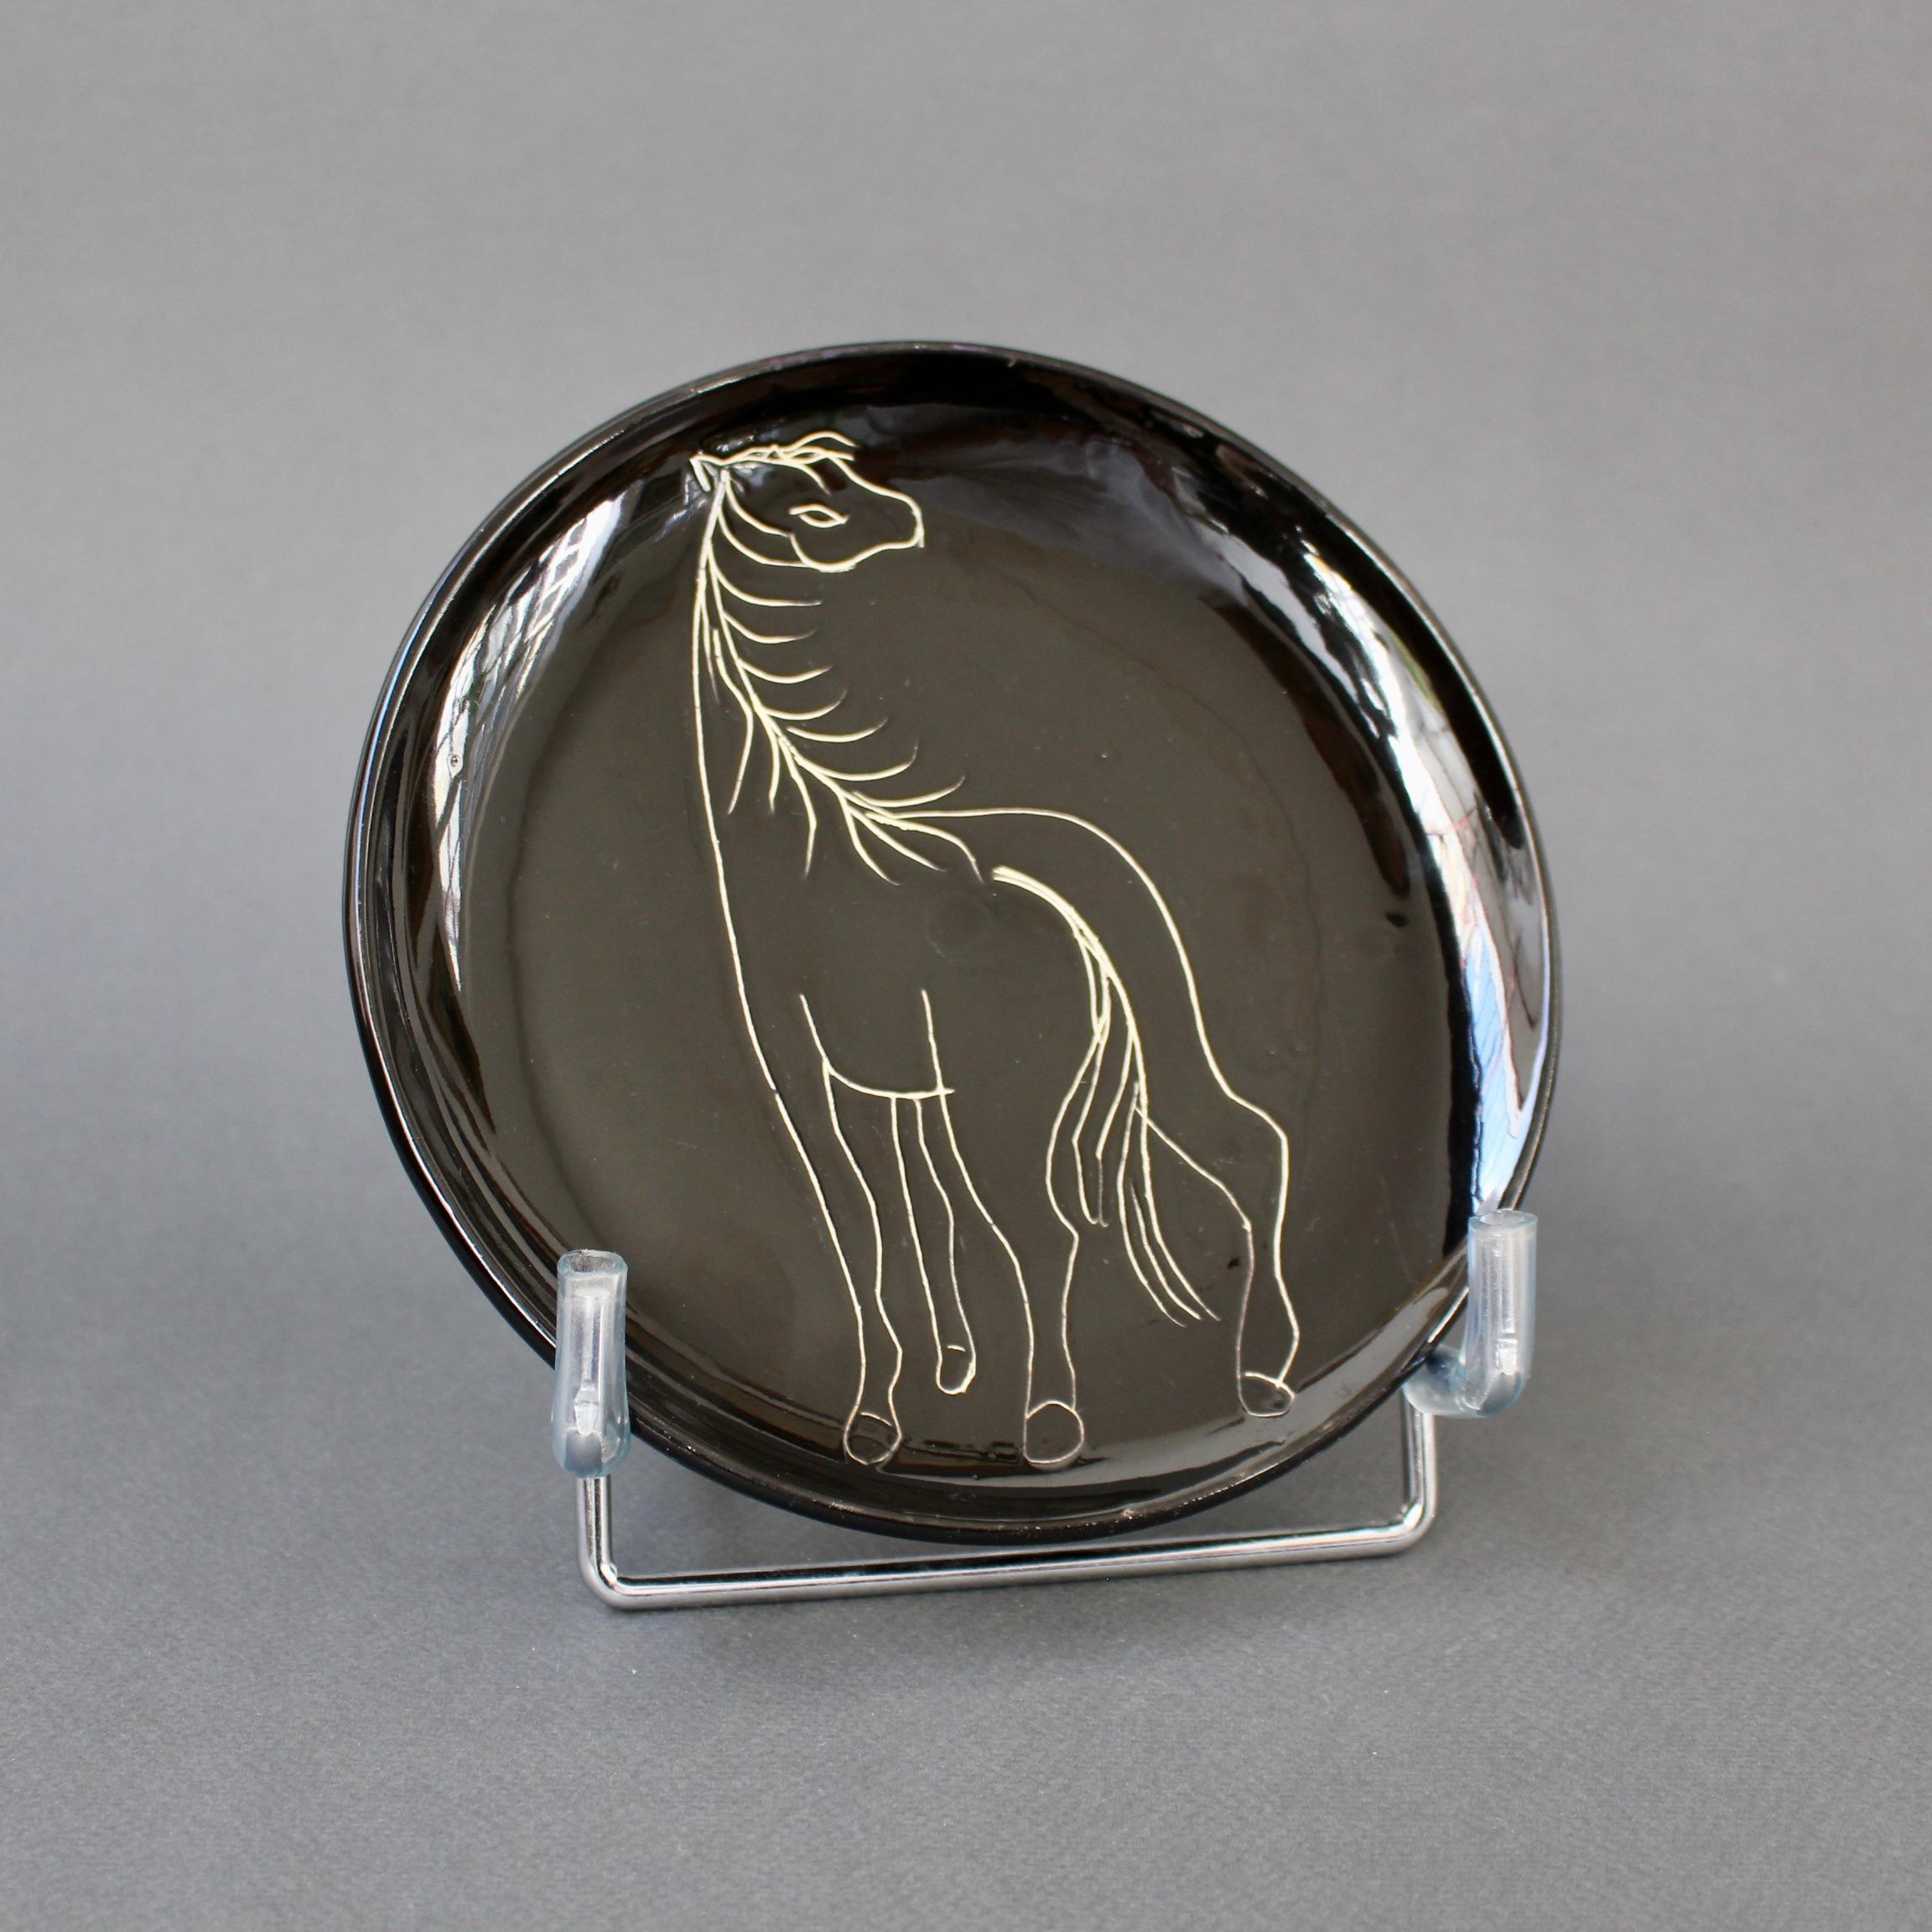 Pair of French mid-century ceramic plates with stylised horses by Atelier Cerenne (circa 1950s). The Chabaneix horse designs are incised into the ceramic, the lighter lines contrasting with the lustrous black. In good overall condition. Signed on